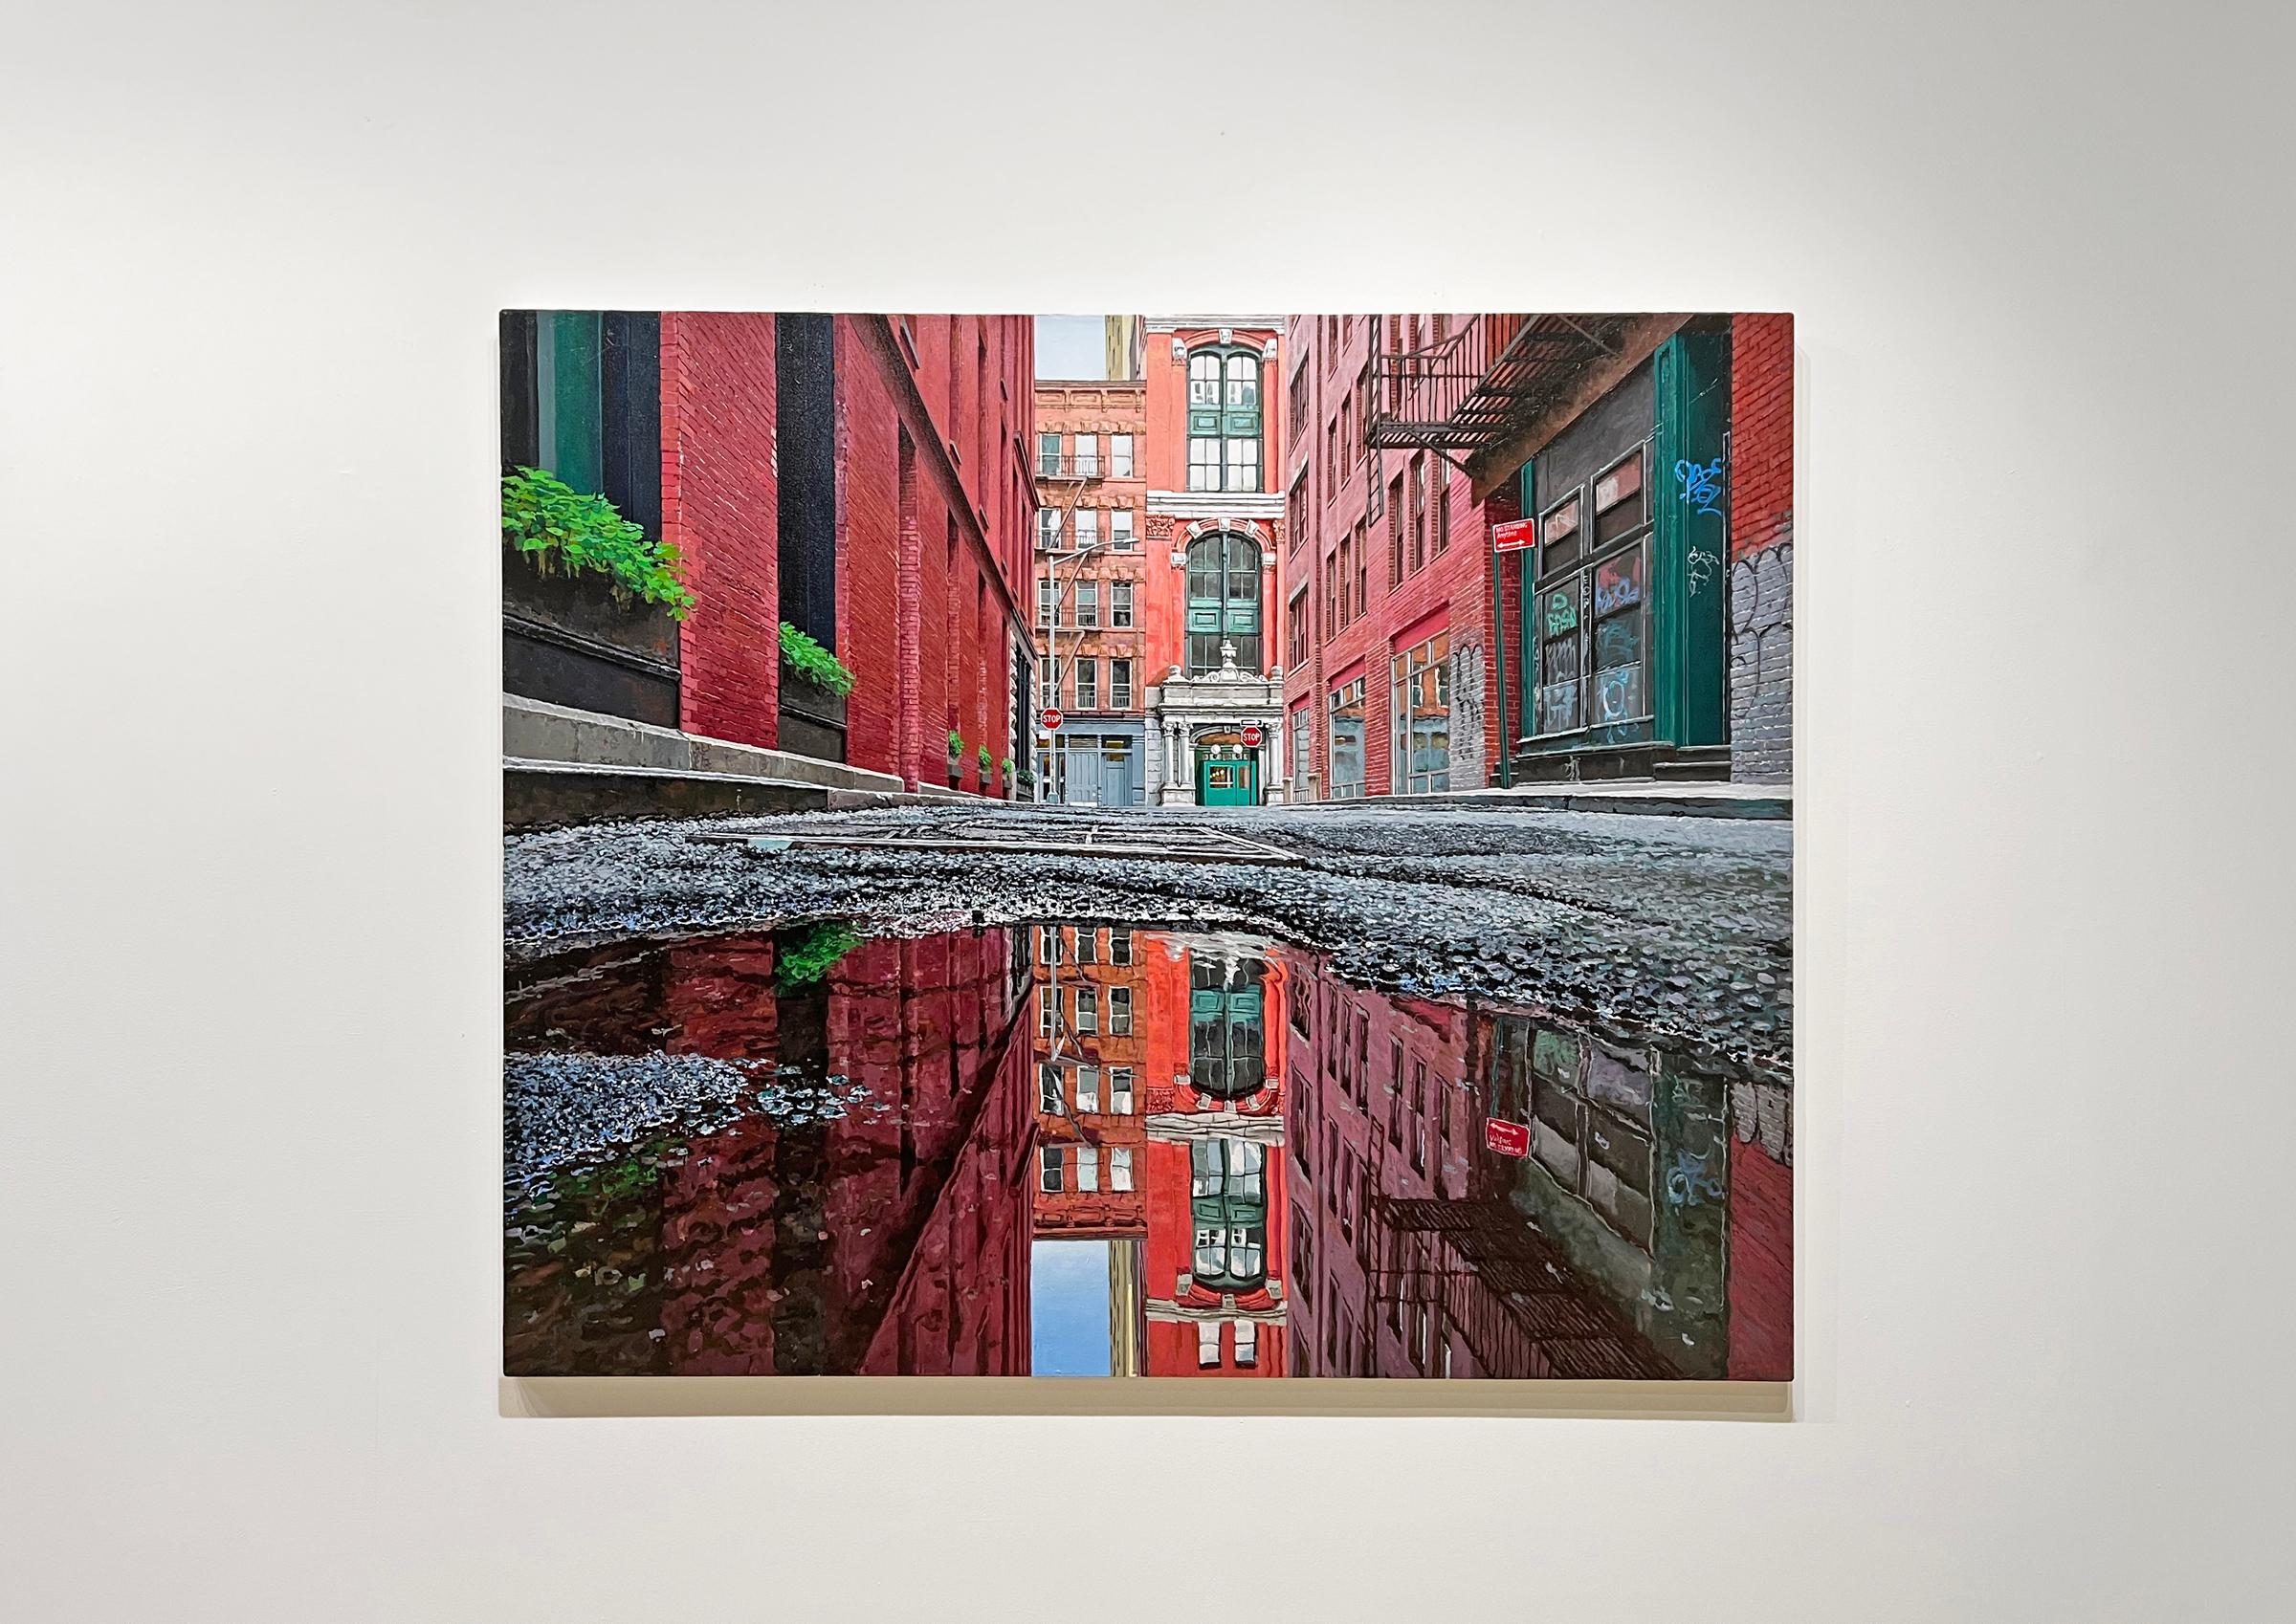 WINTER REFLECTION TRIBECA - Contemporary Photorealism / Cityscape / New York - Painting by Richard Combes